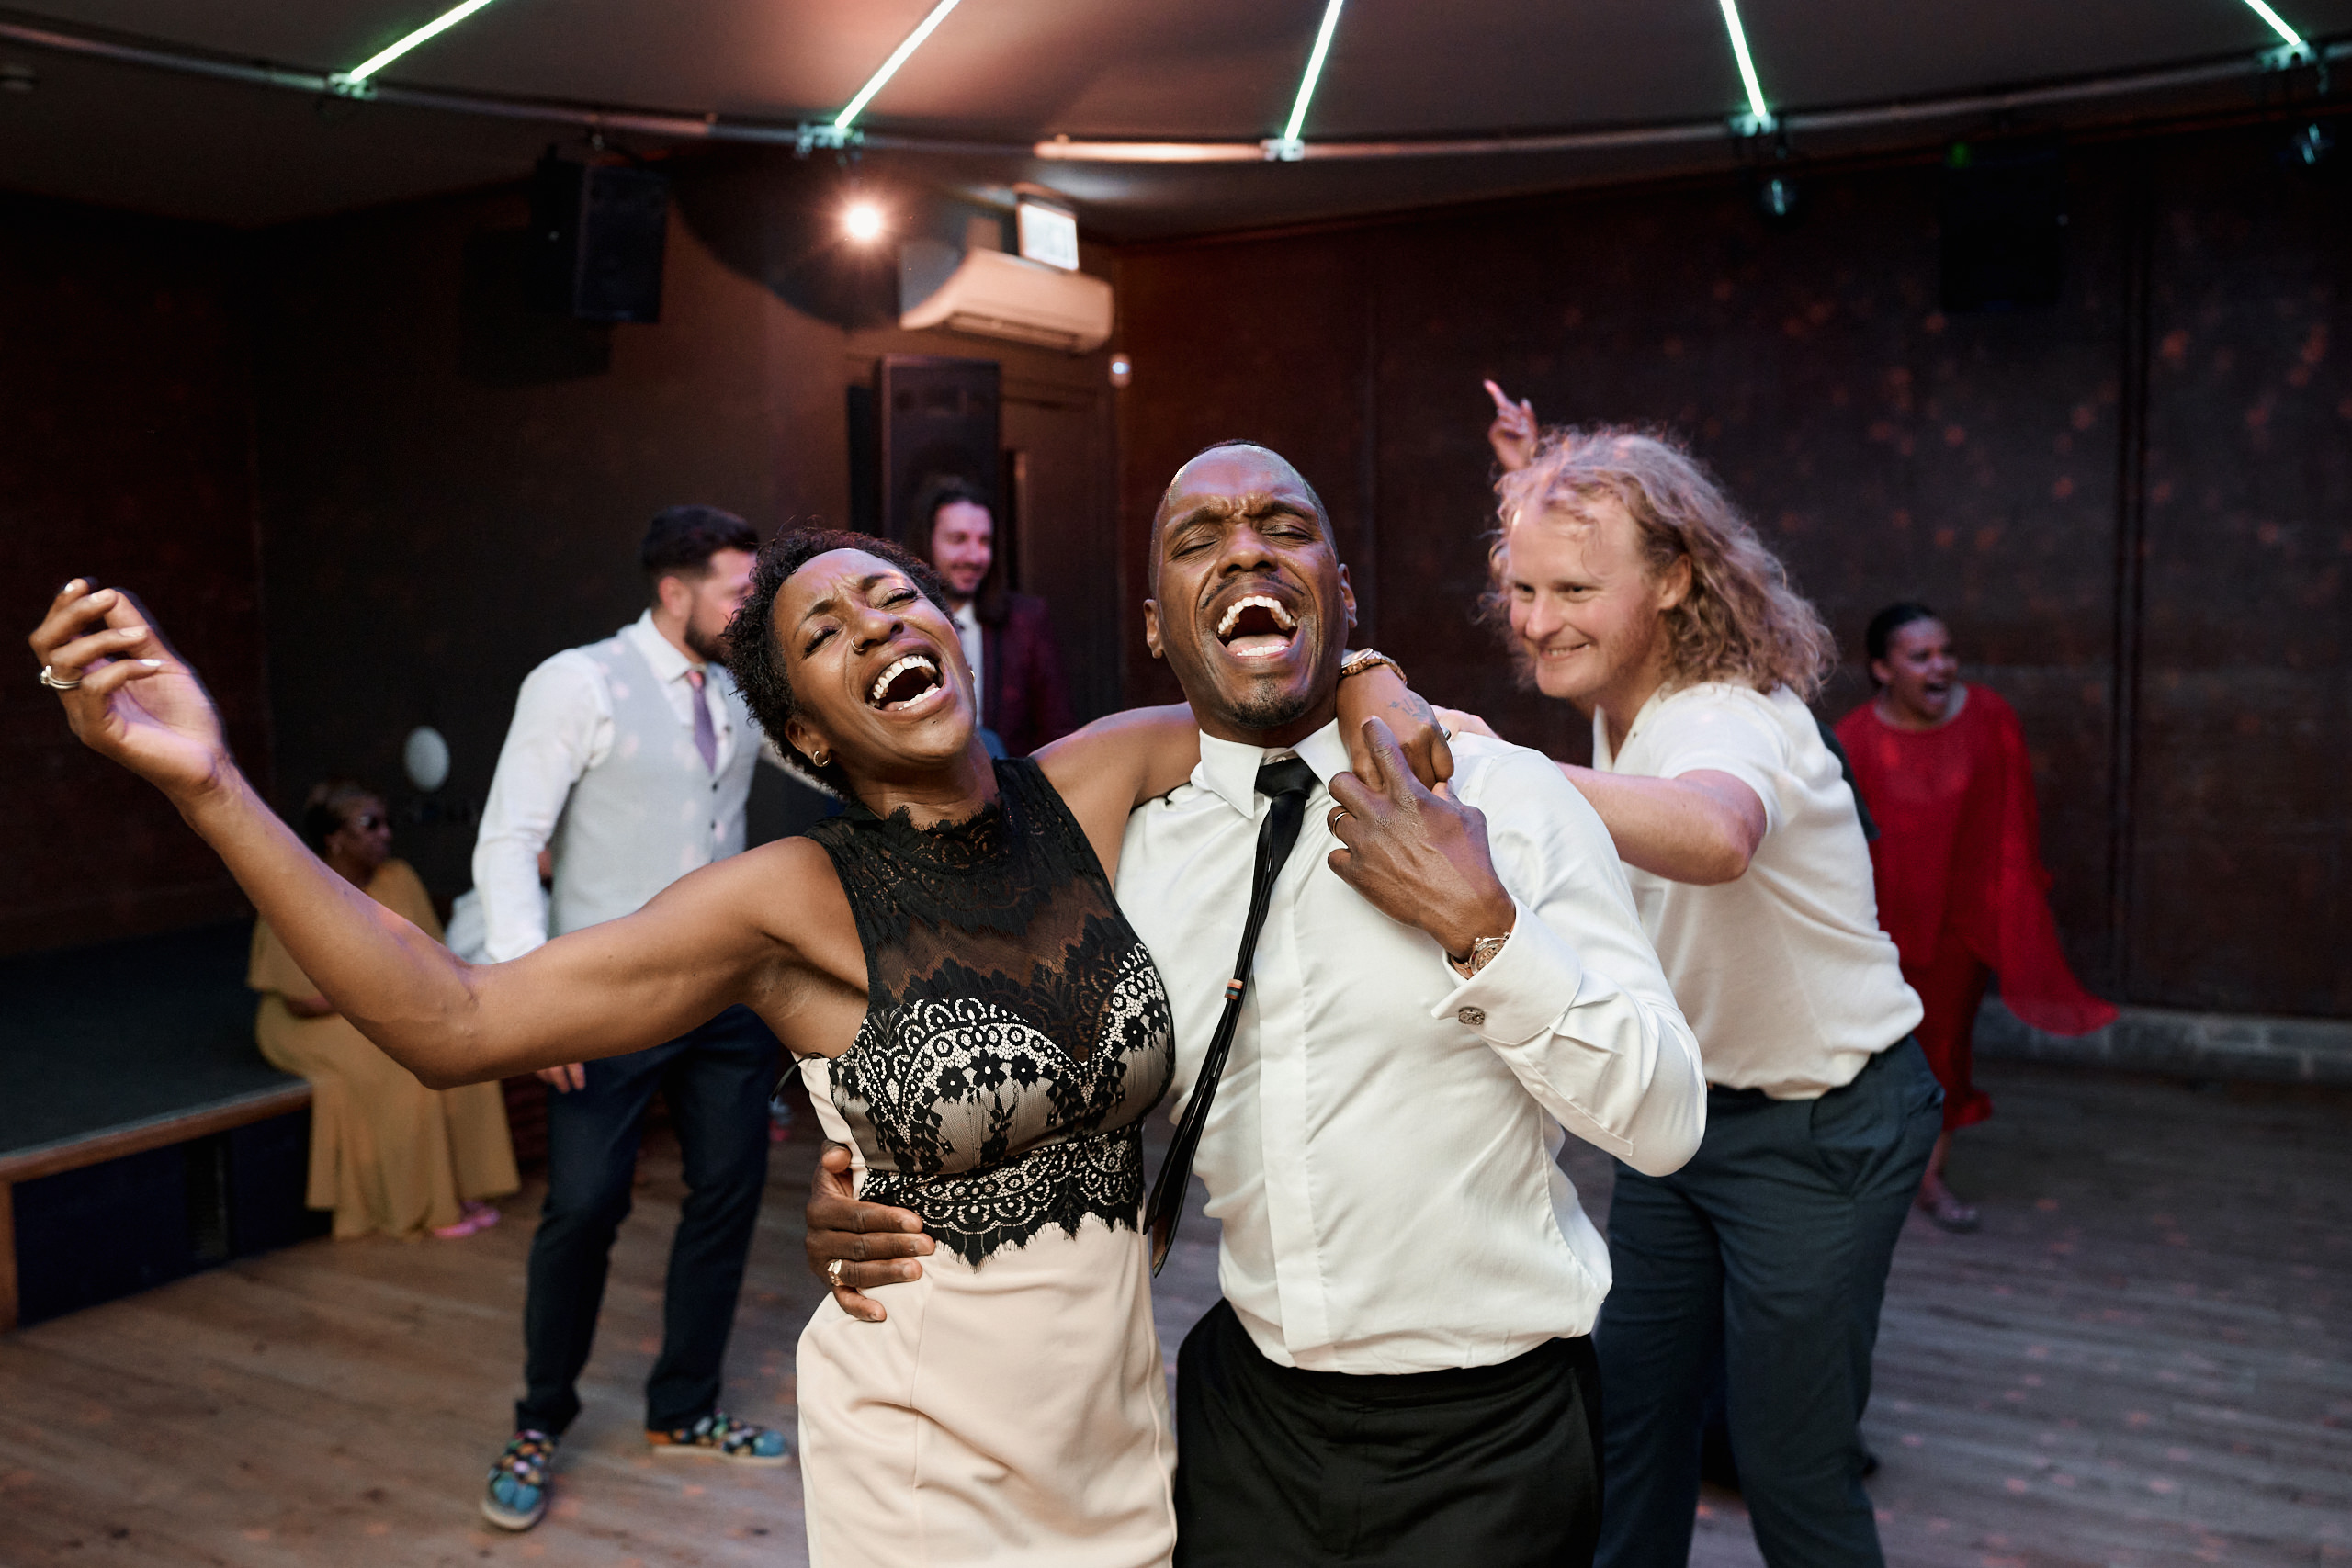 A pair is busting a move on the dance floor at a wedding party.